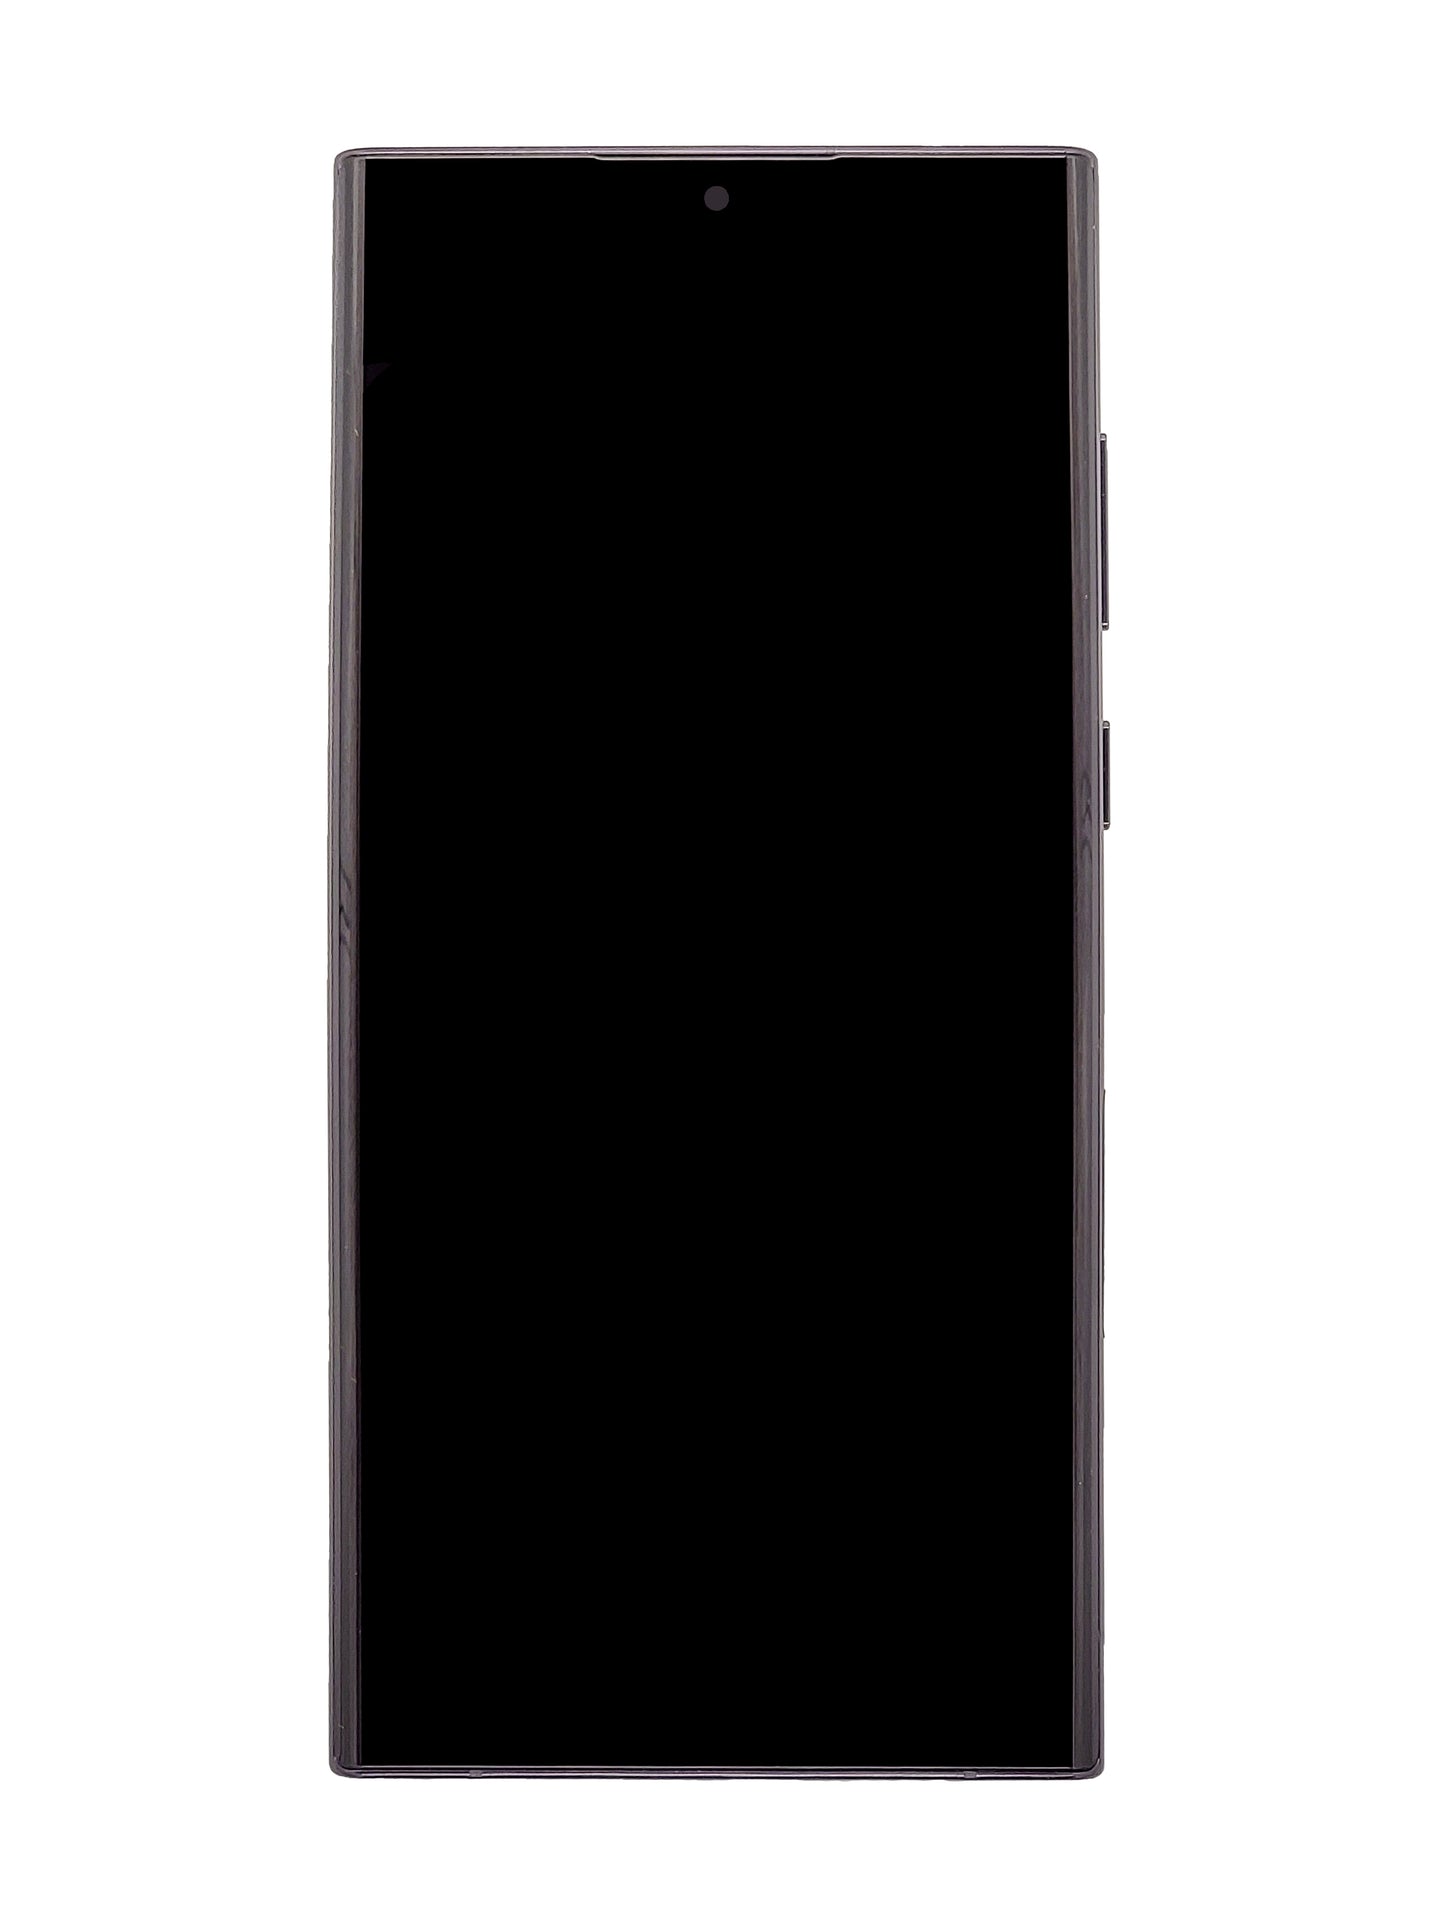 SGS S22 Ultra (5G) Screen Assembly (With The Frame) (Refurbished) (Black)